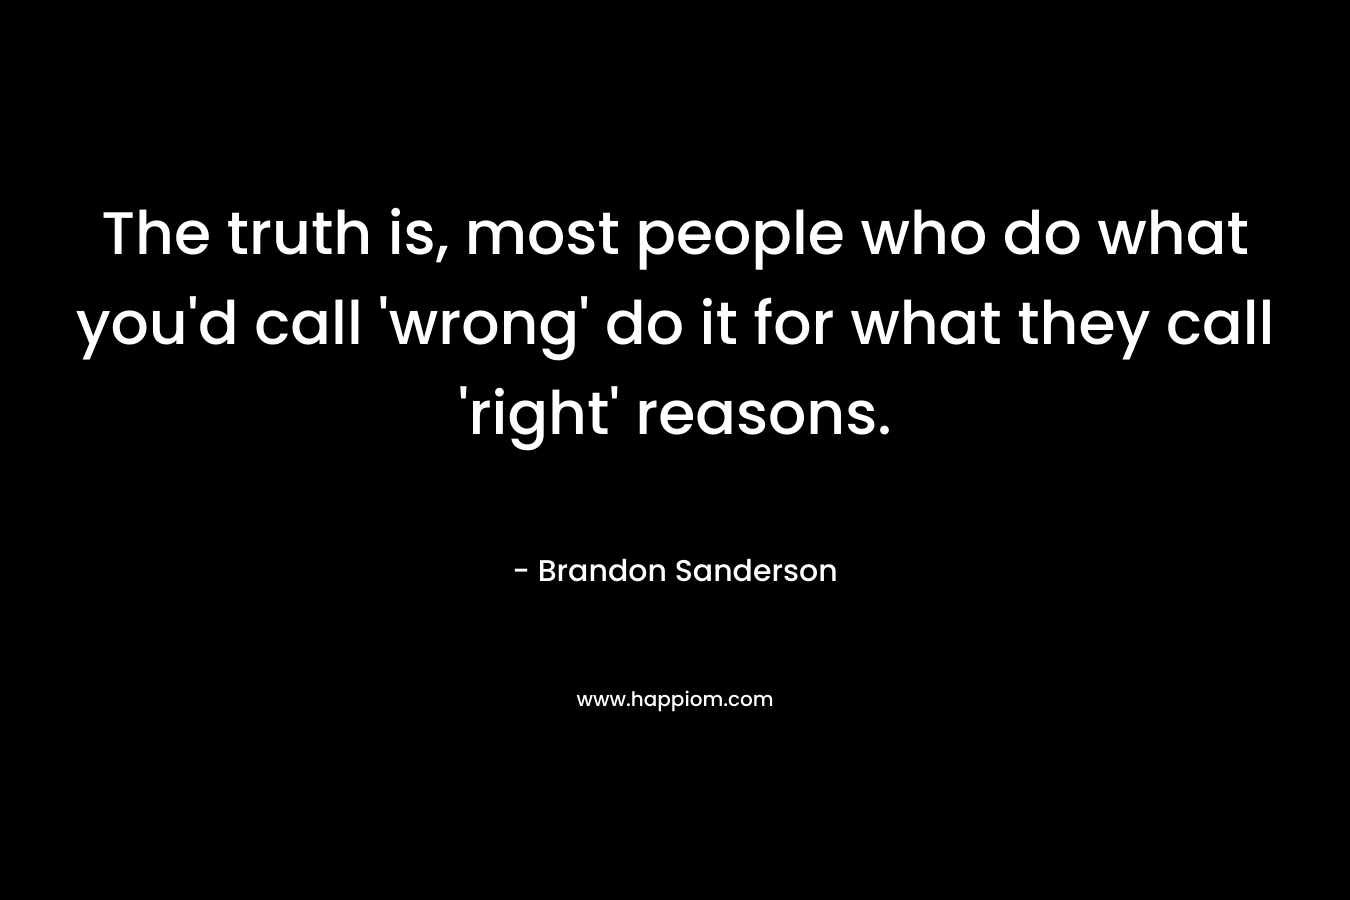 The truth is, most people who do what you'd call 'wrong' do it for what they call 'right' reasons.